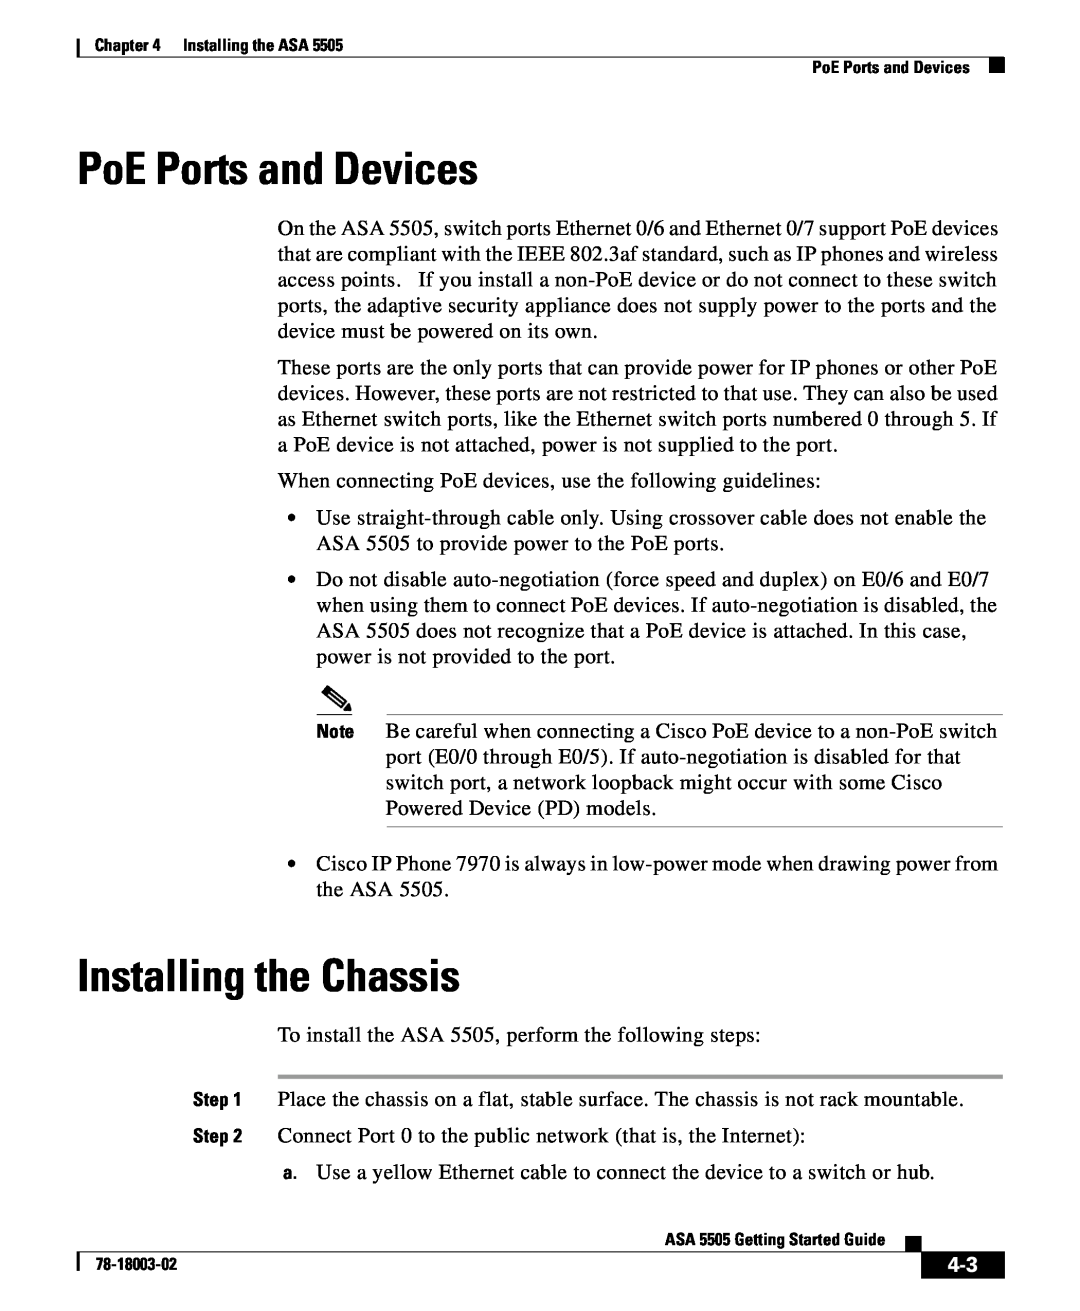 Cisco Systems 5505 manual PoE Ports and Devices, Installing the Chassis 